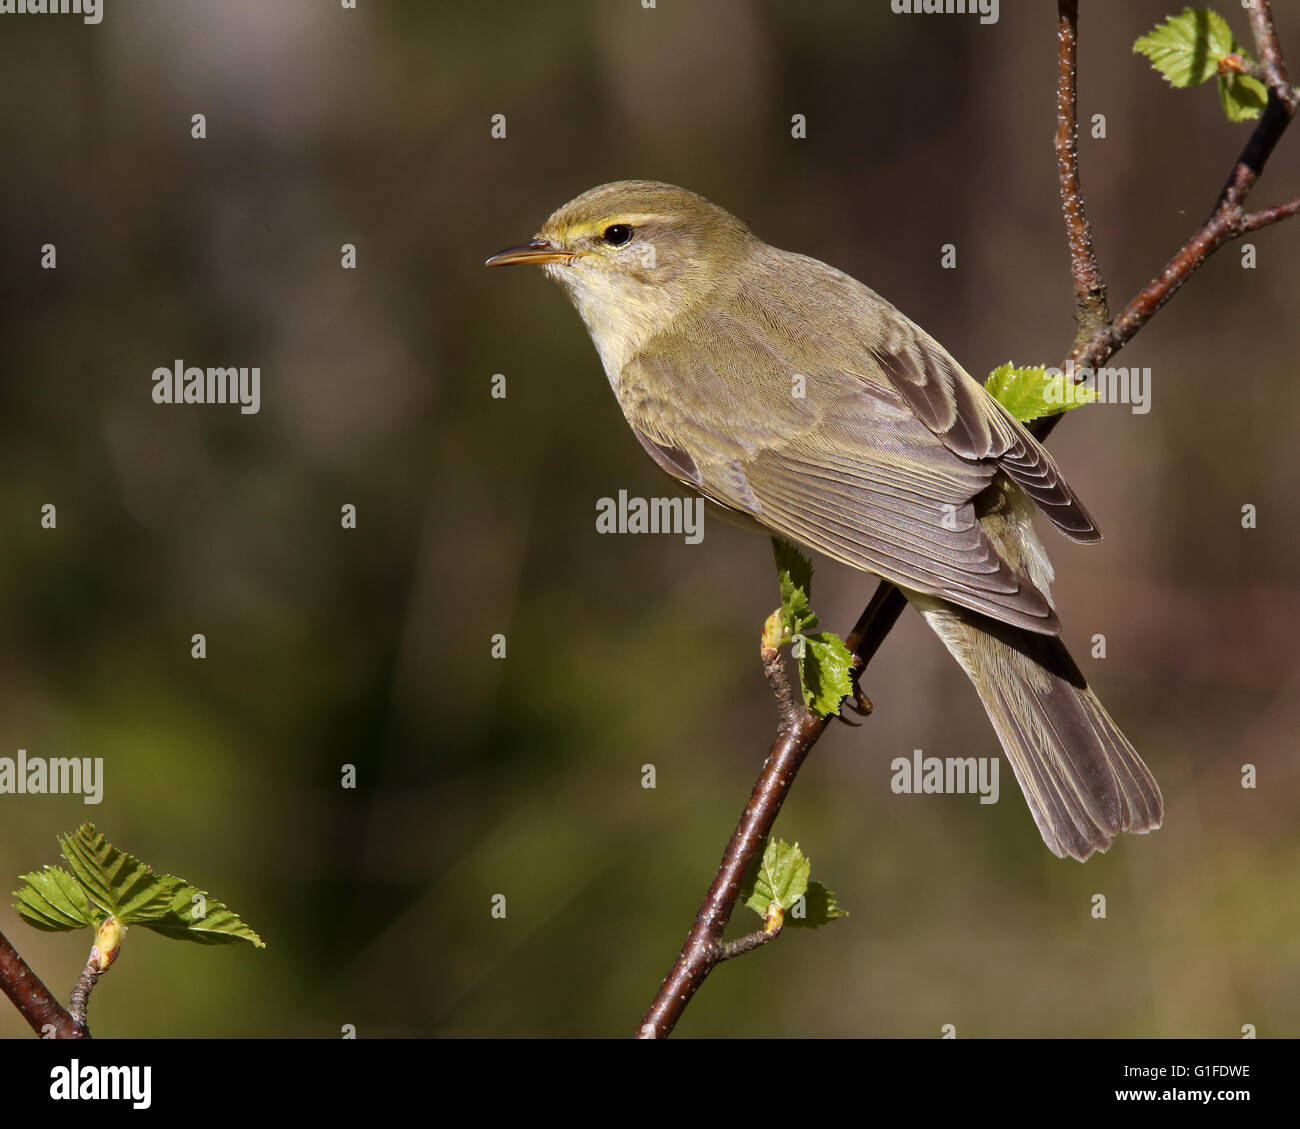 Willow warbler/ Bird in leaf budding / Birch leaves Stock Photo